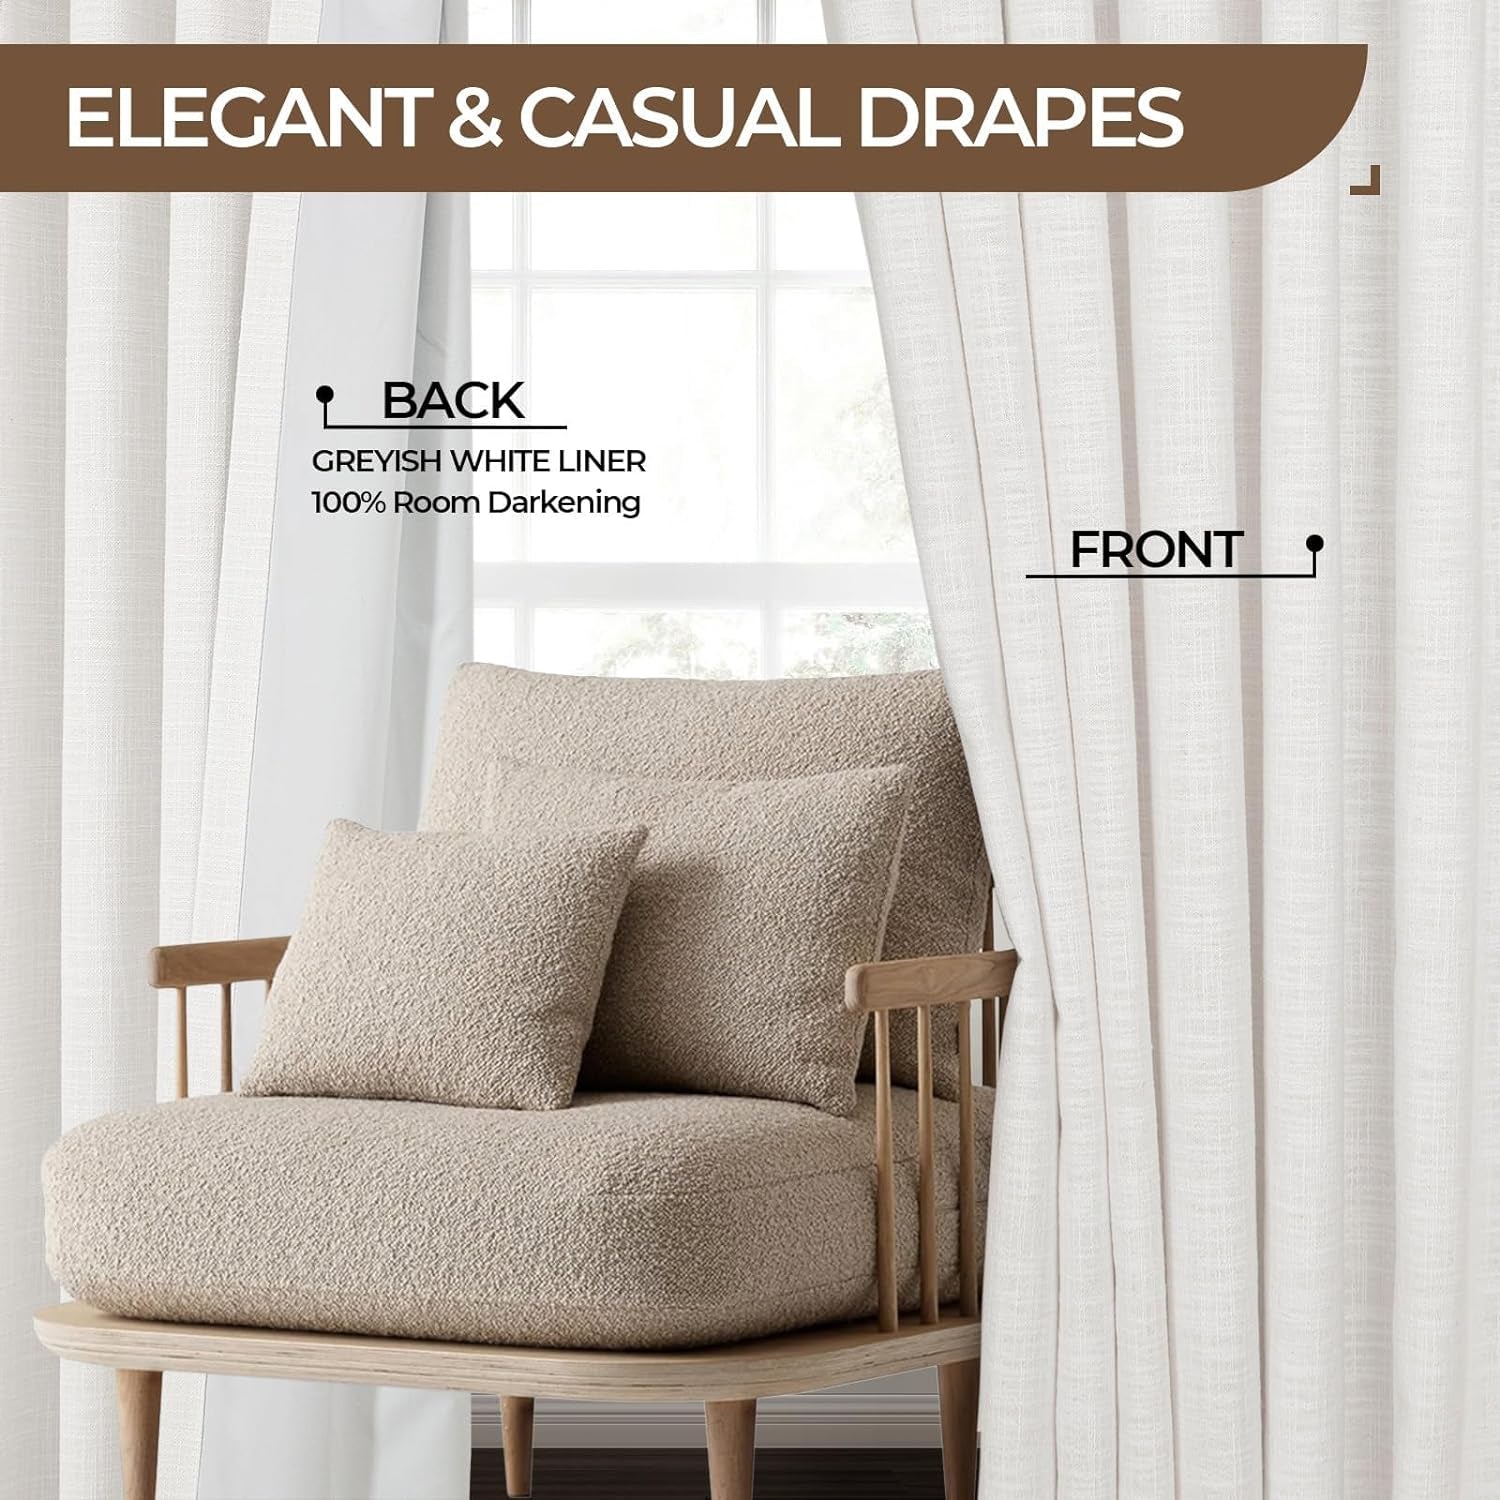 INOVADAY 100% Blackout Curtains for Bedroom, Pinch Pleated Linen Blackout Curtains 96 Inch Length 2 Panels Set, Thermal Room Darkening Linen Curtain Drapes for Living Room, W40 X L96,Beige White  INOVADAY   